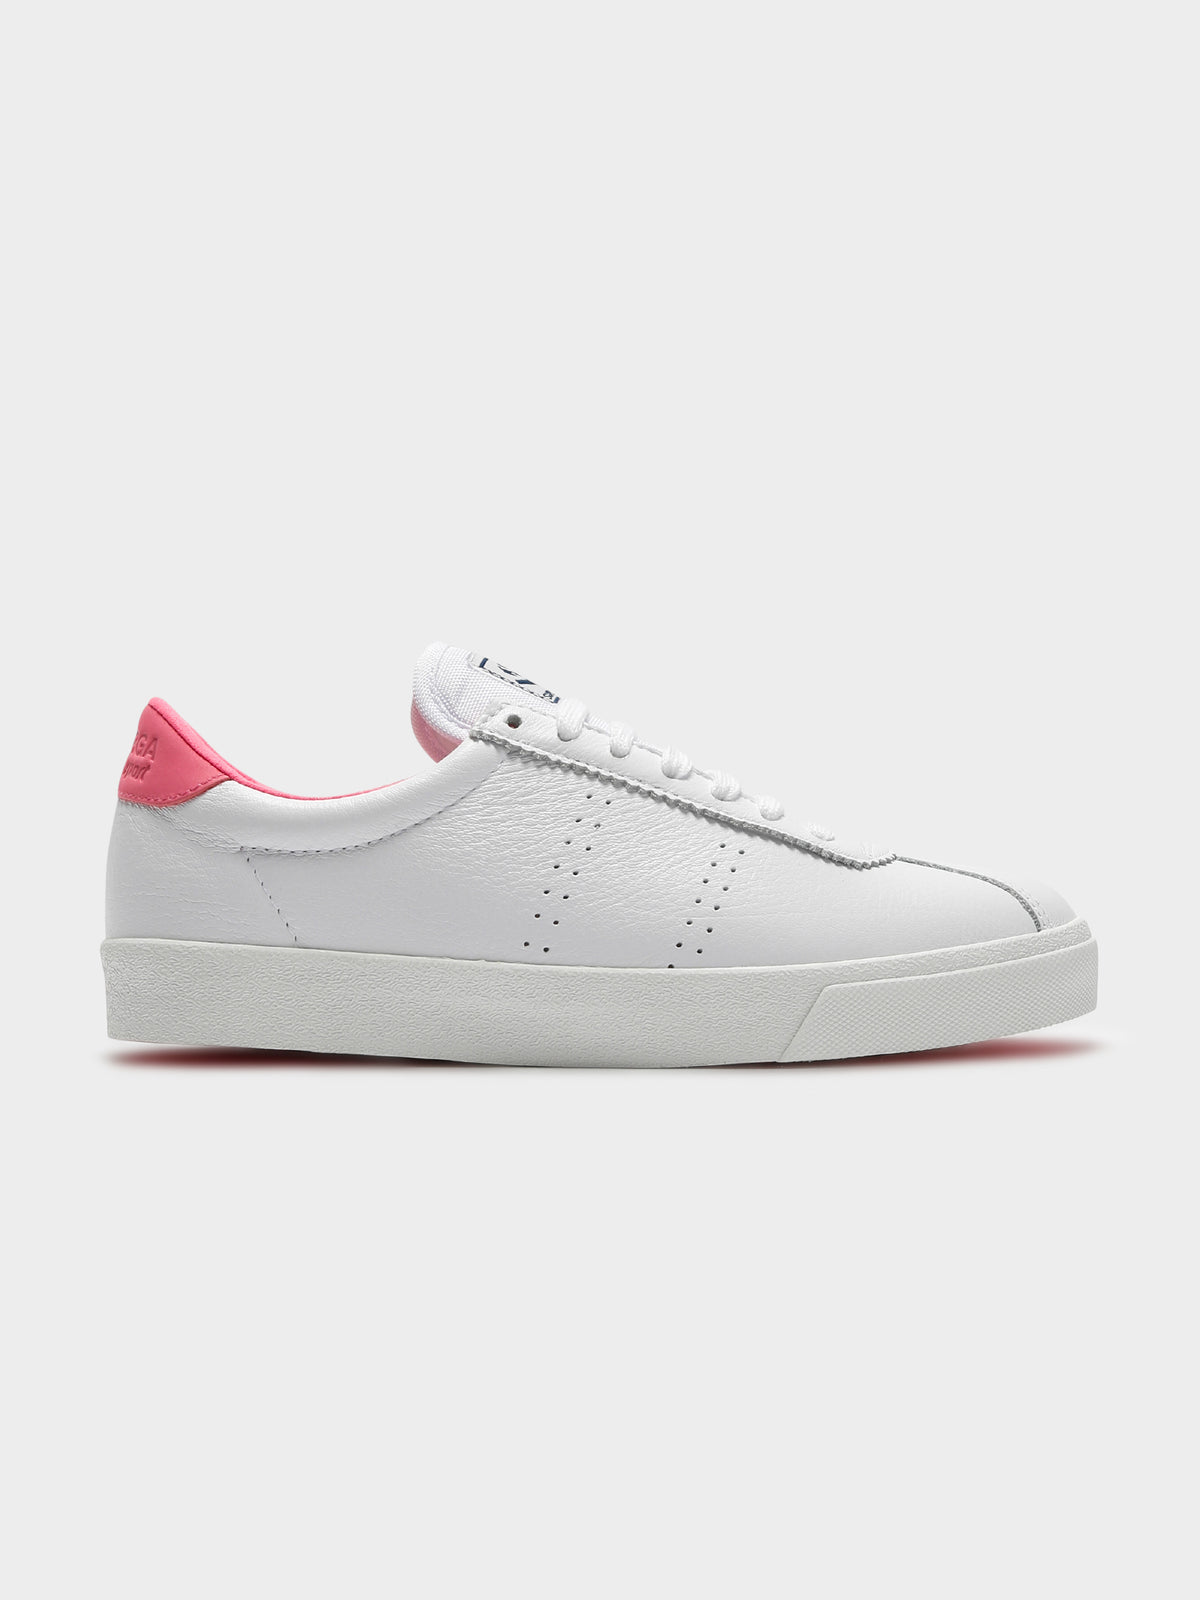 Womens 2843 Clubs Comfleau Sneakers in White &amp; Fuchsia Pink